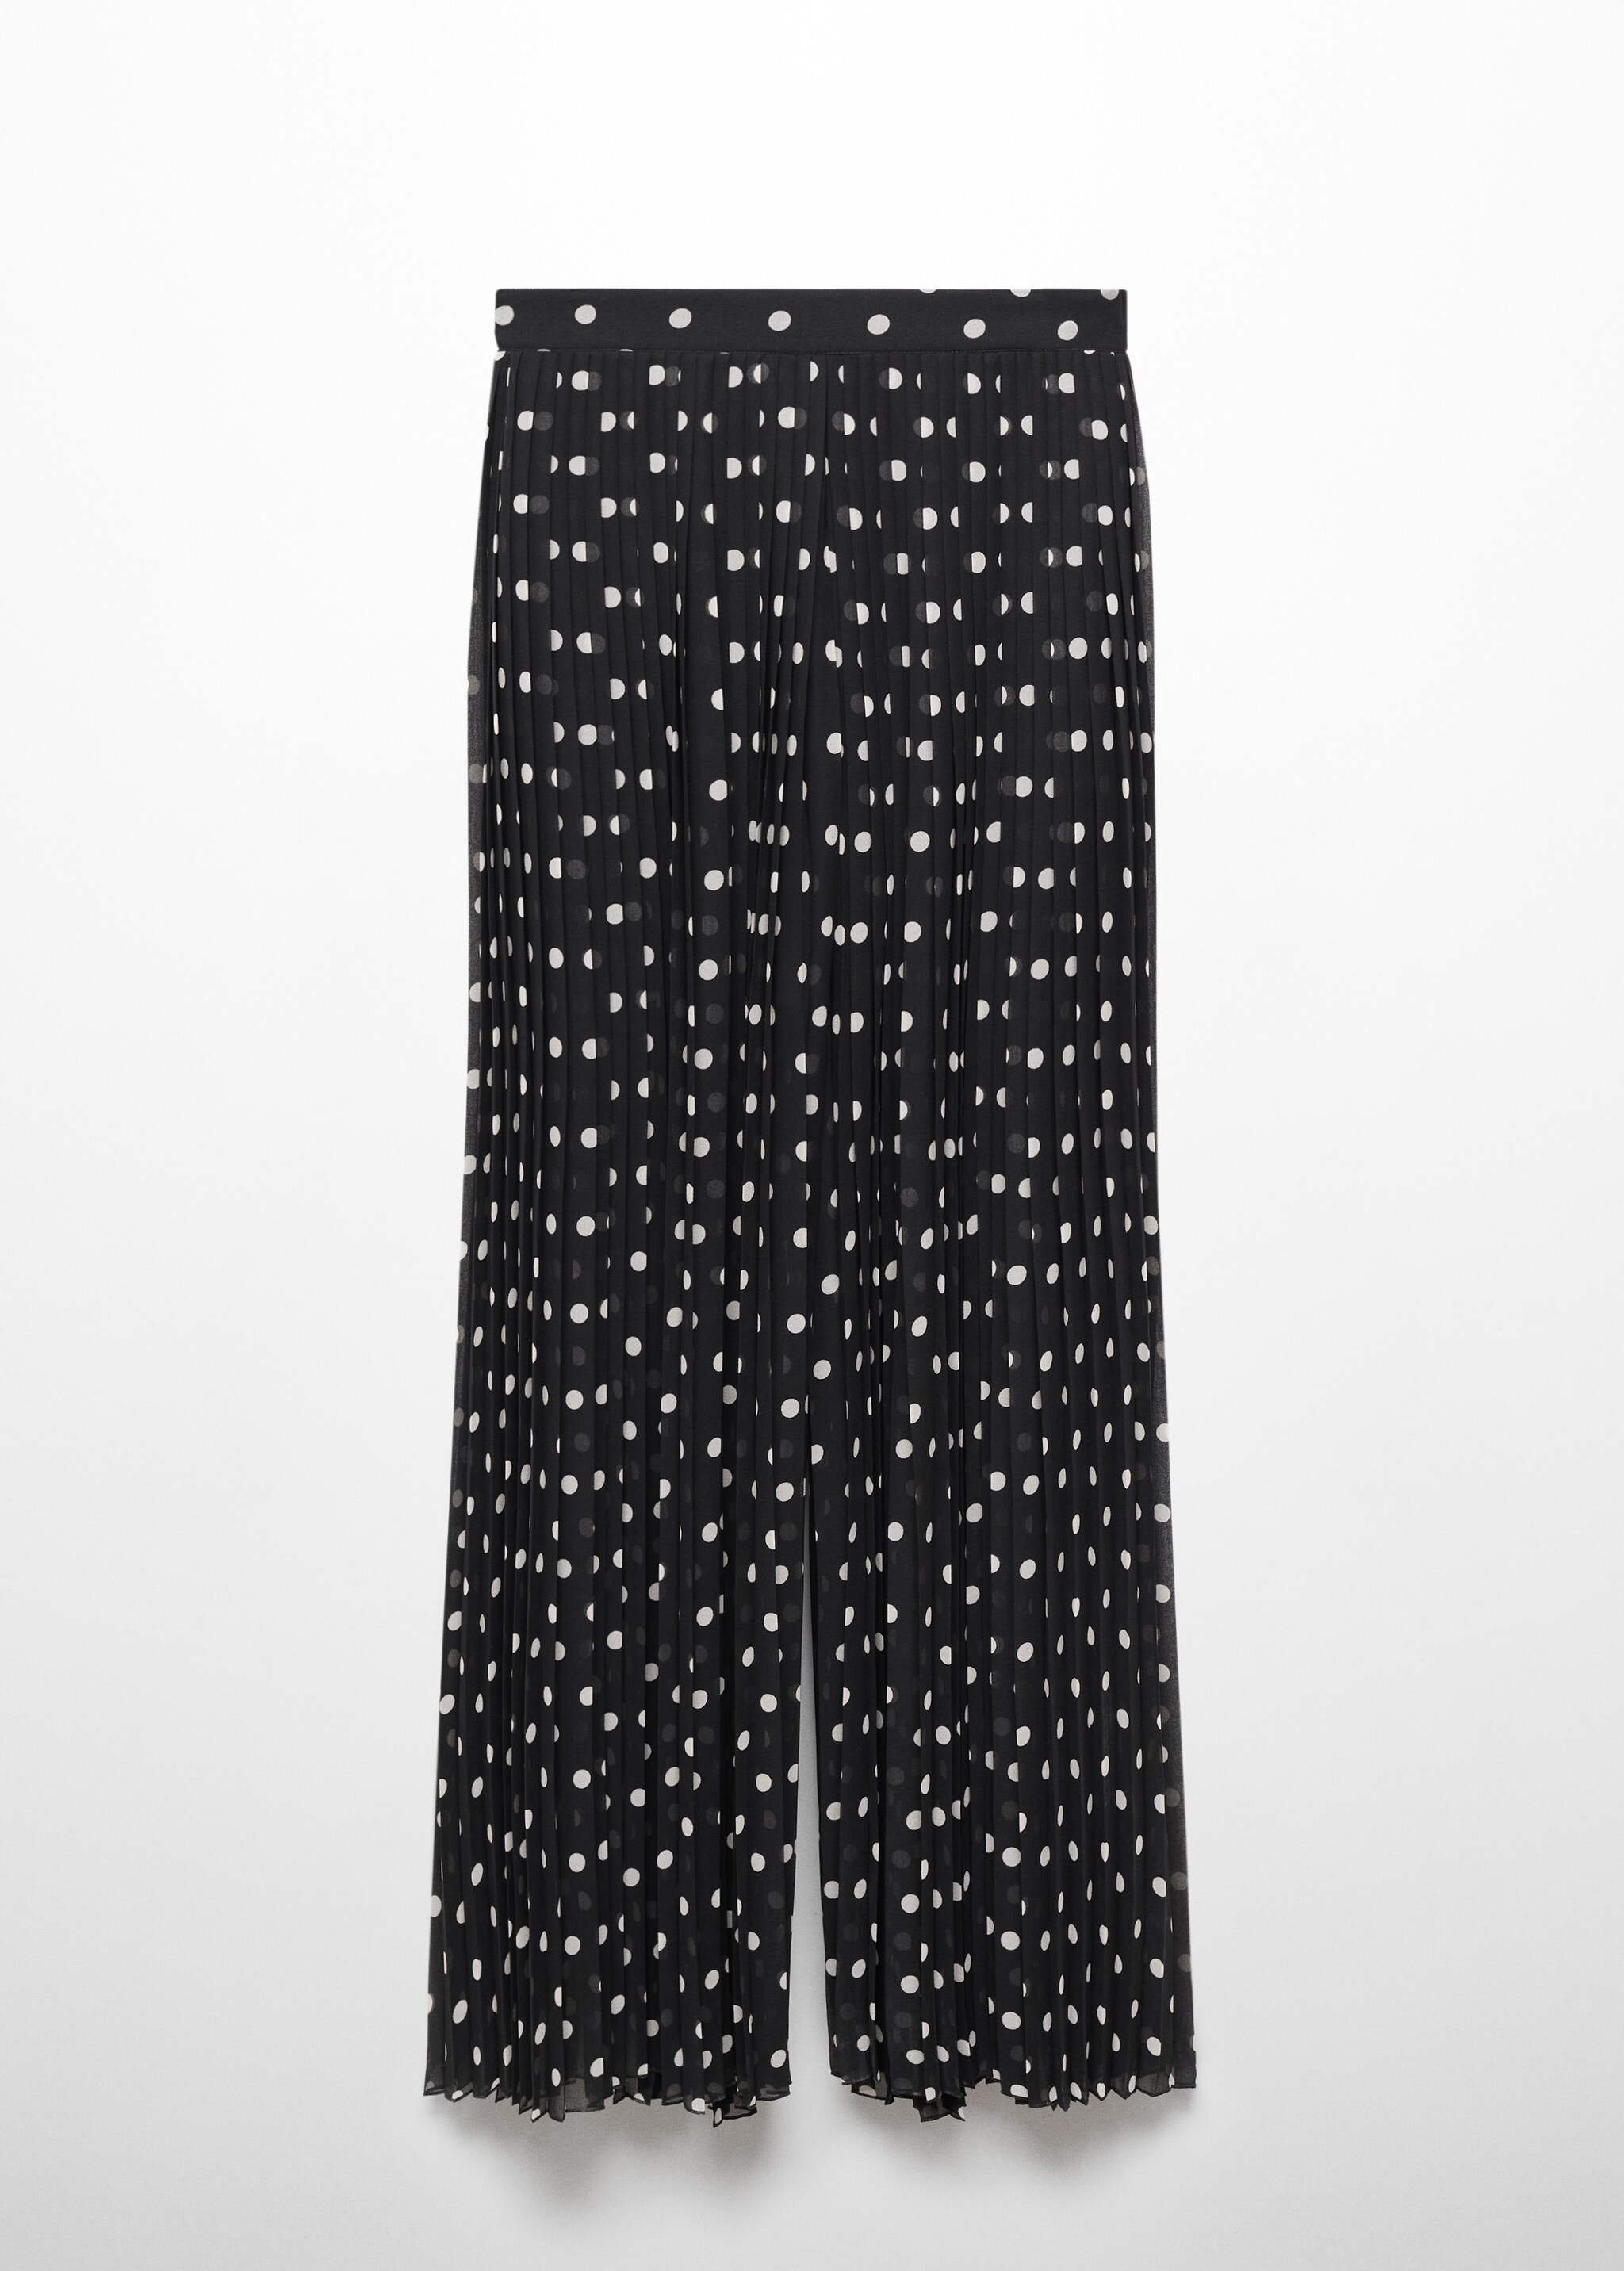 Polka dot pleated pants - Article without model